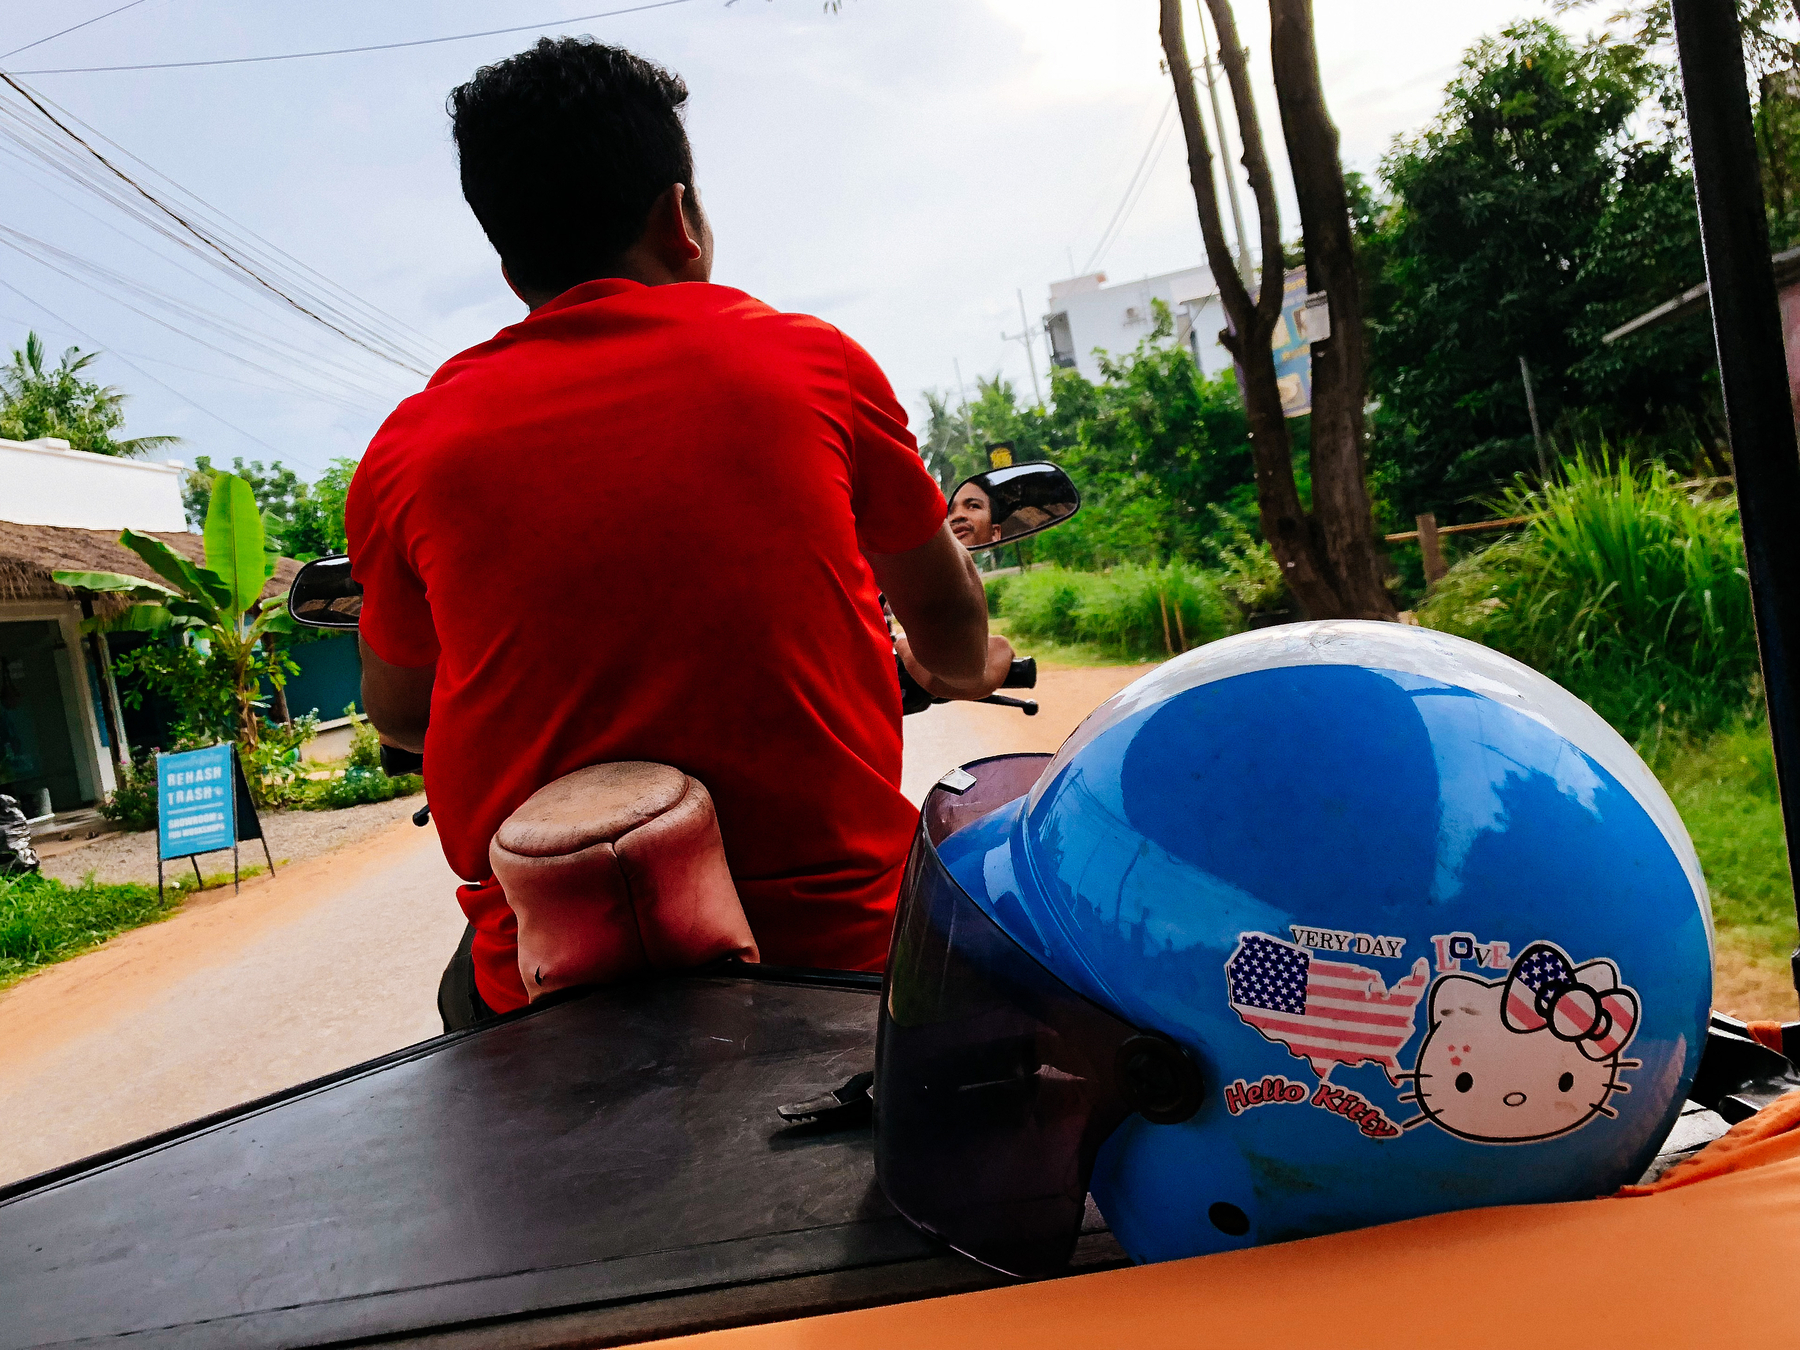 A tuk tuk driver with his back to us, and a blue helmet in the foreground, the word “very say hello Kitty love” written on it 